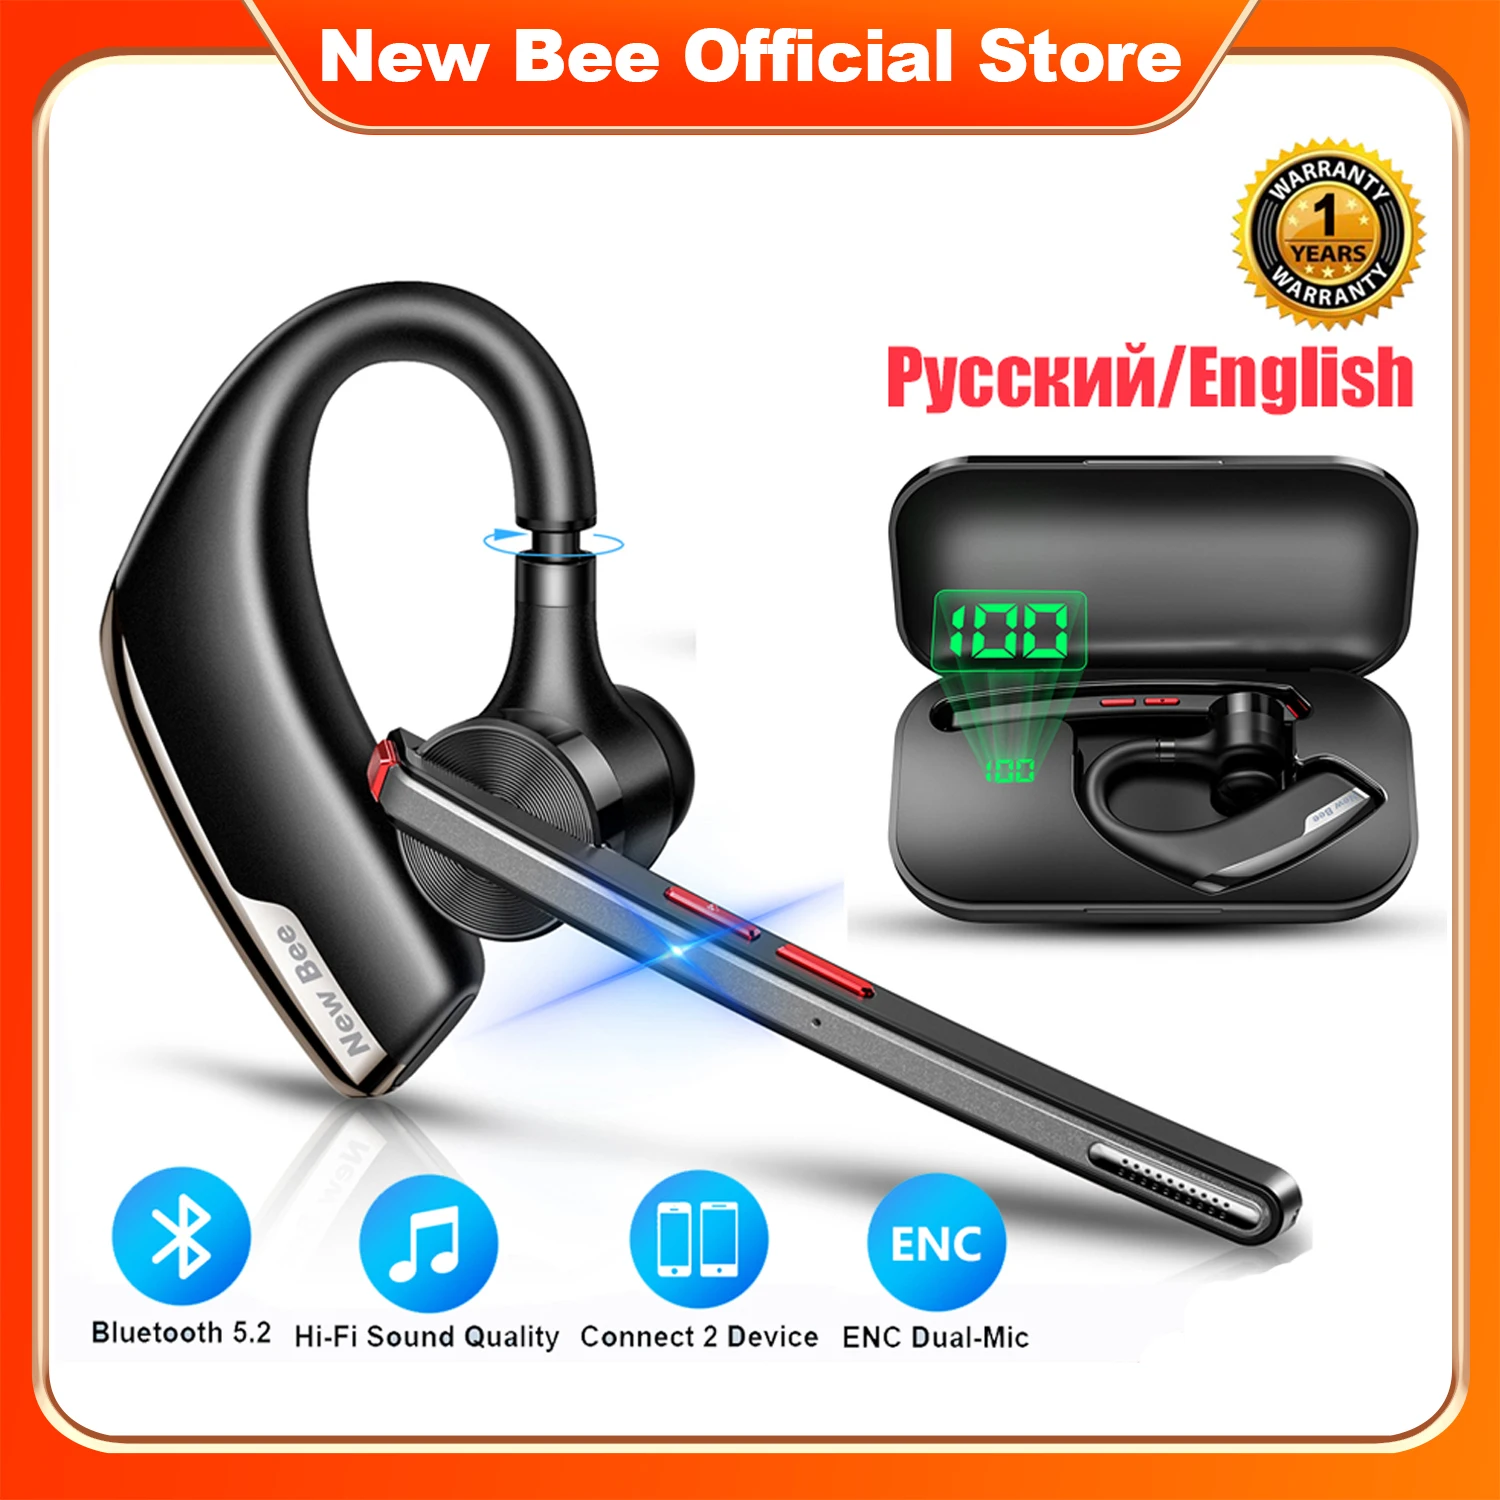 

New Bee M51 Wireless Bluetooth Headset Earphones 5.2 Headphone with Dual-Mic CVC8.0 Noise Cancelling Handsfree Business Earbuds